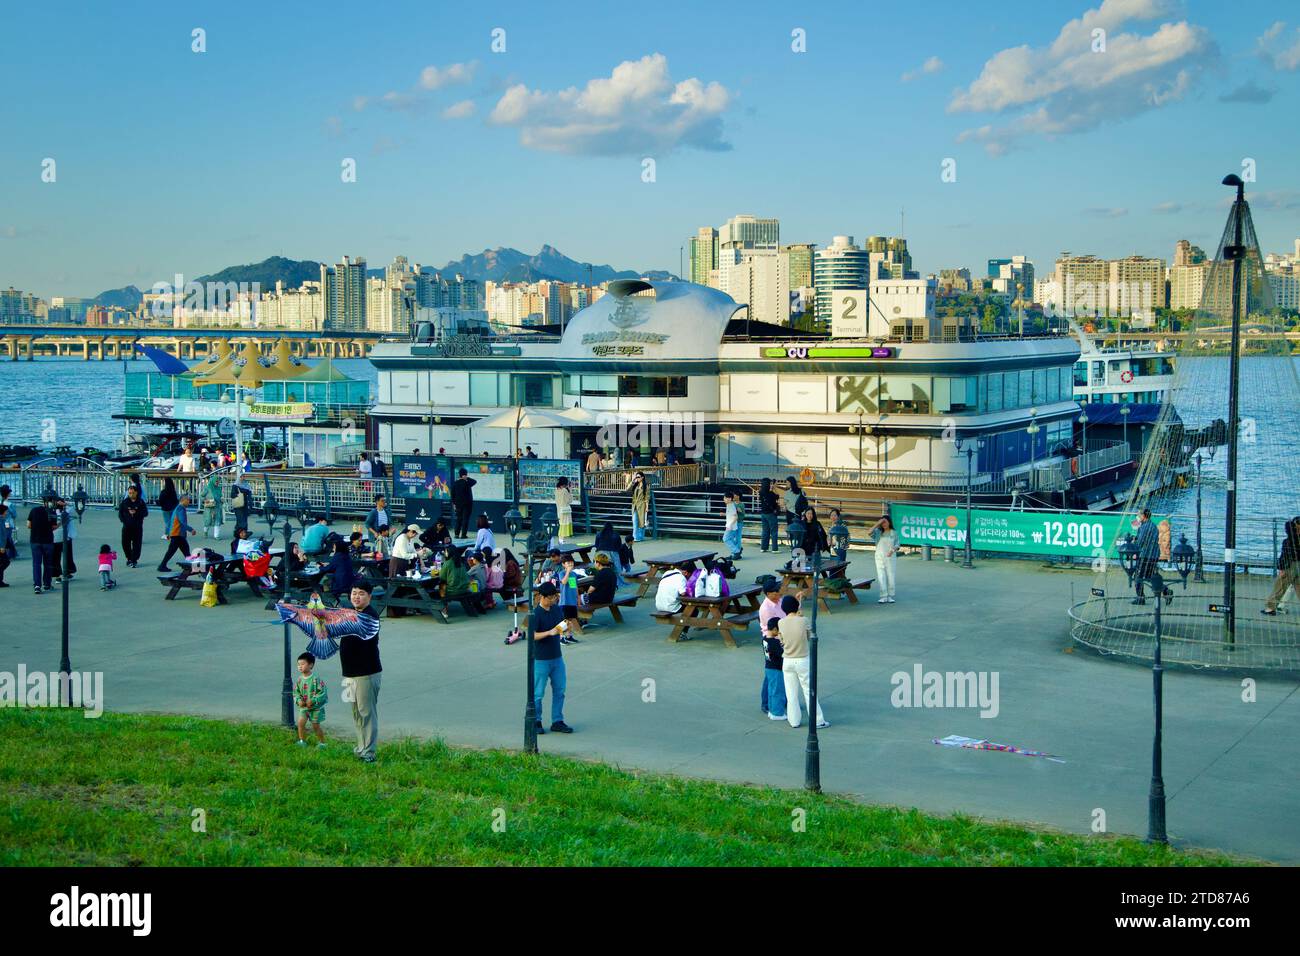 Seoul, South Korea - June 3, 2023: E-Land Cruise Ships docked at Yeouido Hangang Park, with people enjoying the riverside courtyard and picnic tables Stock Photo